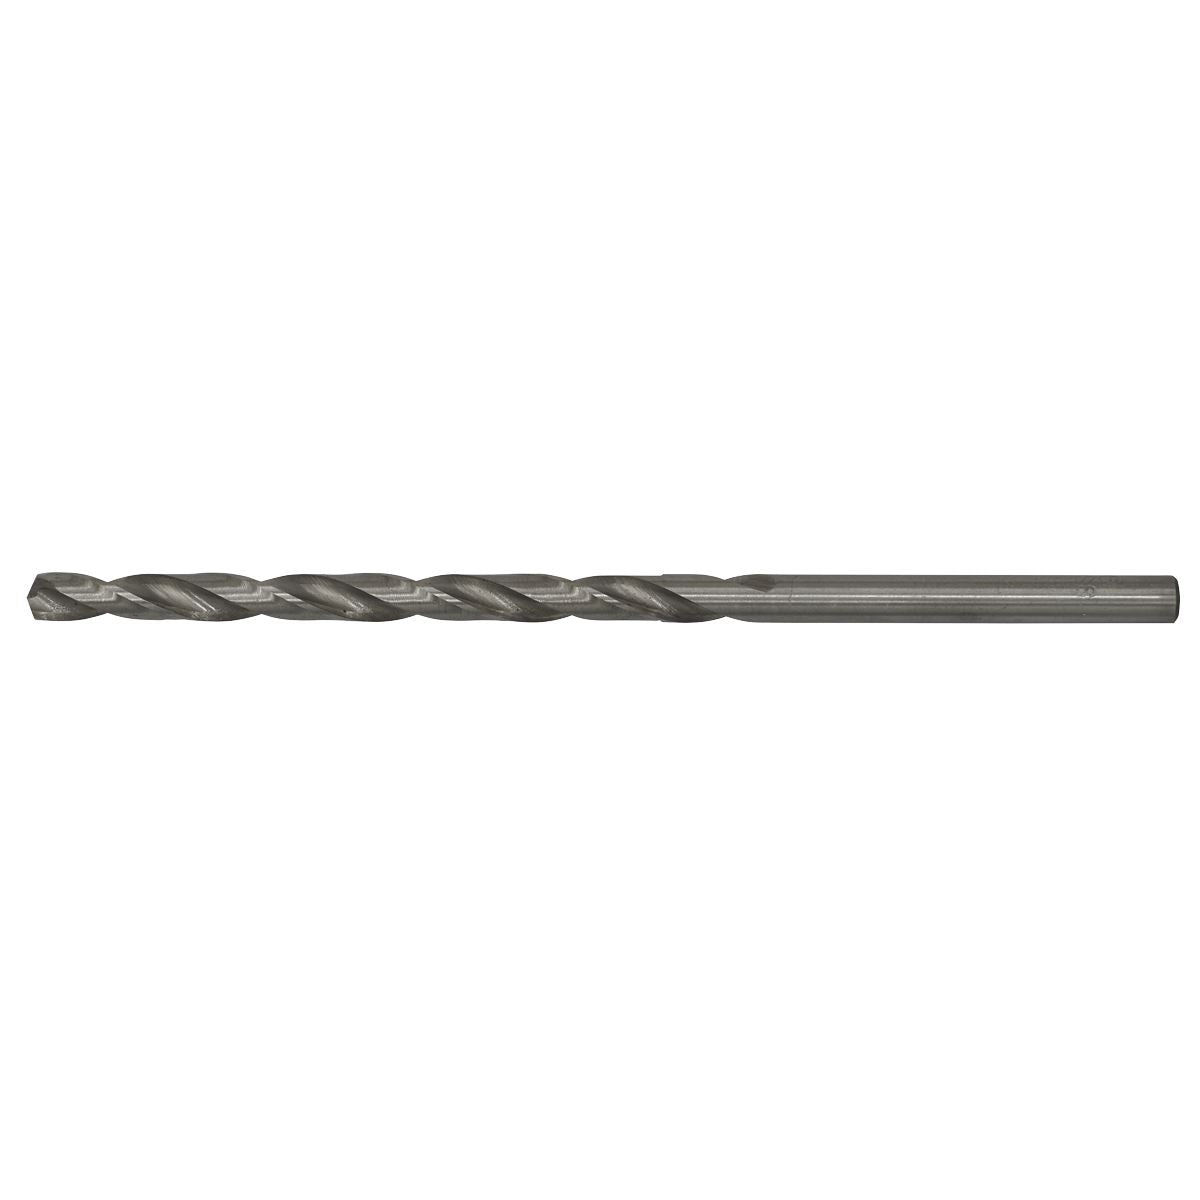 Worksafe by Sealey Long Series HSS Twist Drill Bit Ø9.5 x 175mm - Pack of 5